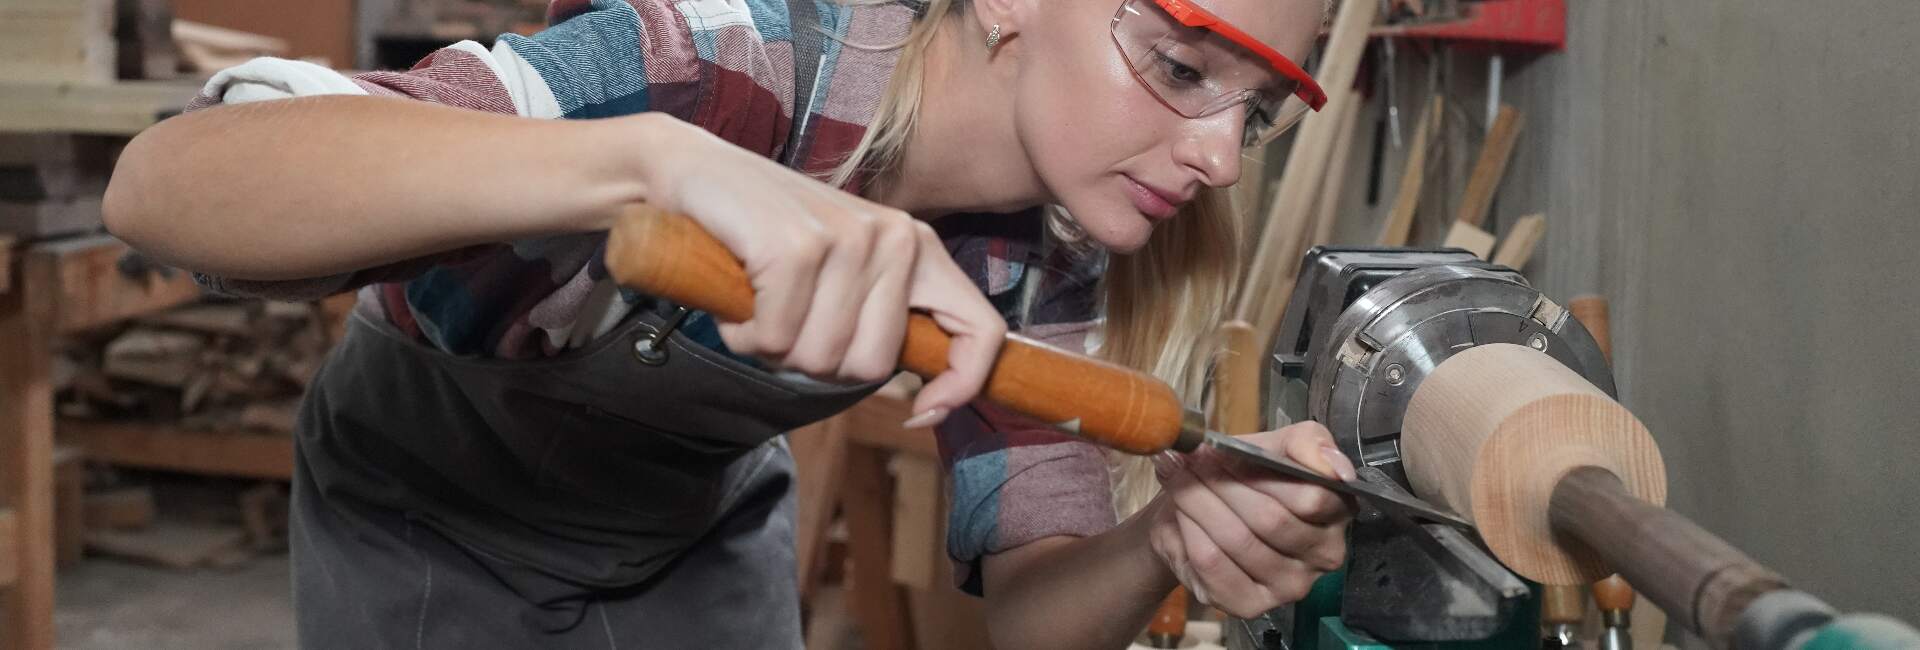 young woman works with tools in DIY woodshop